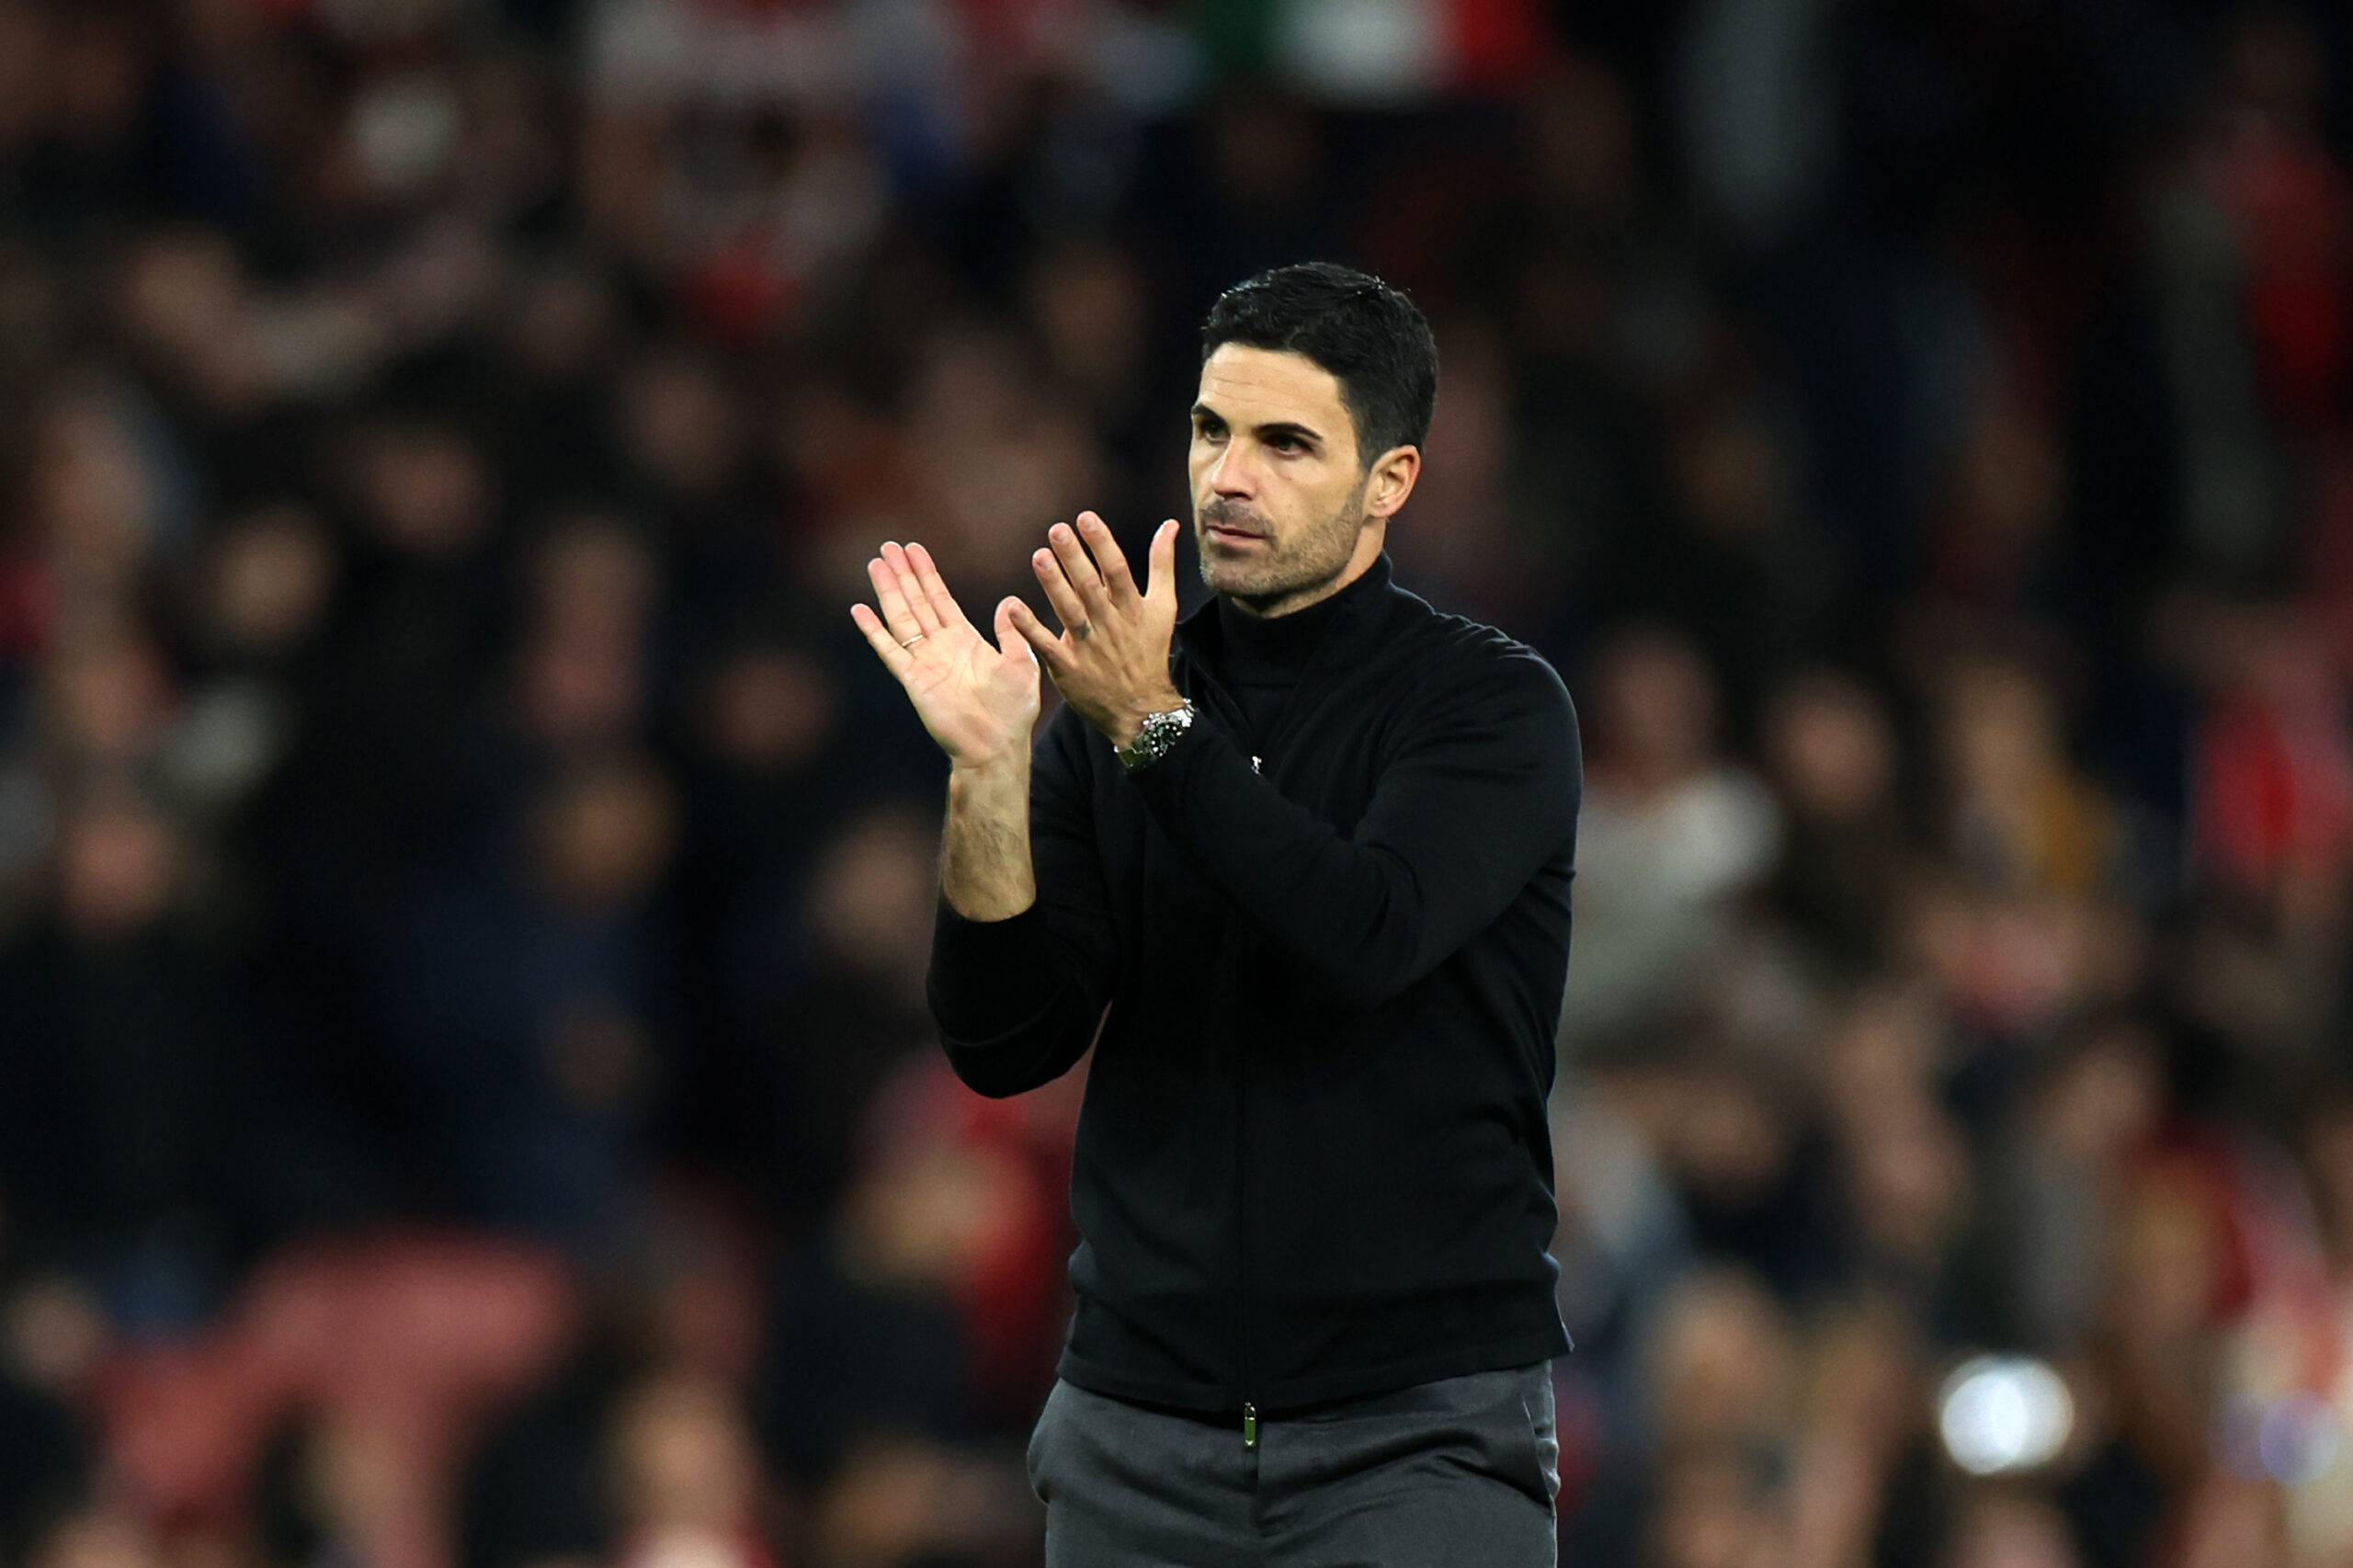 Arsenal boss Mikel Arteta applauding the supporters